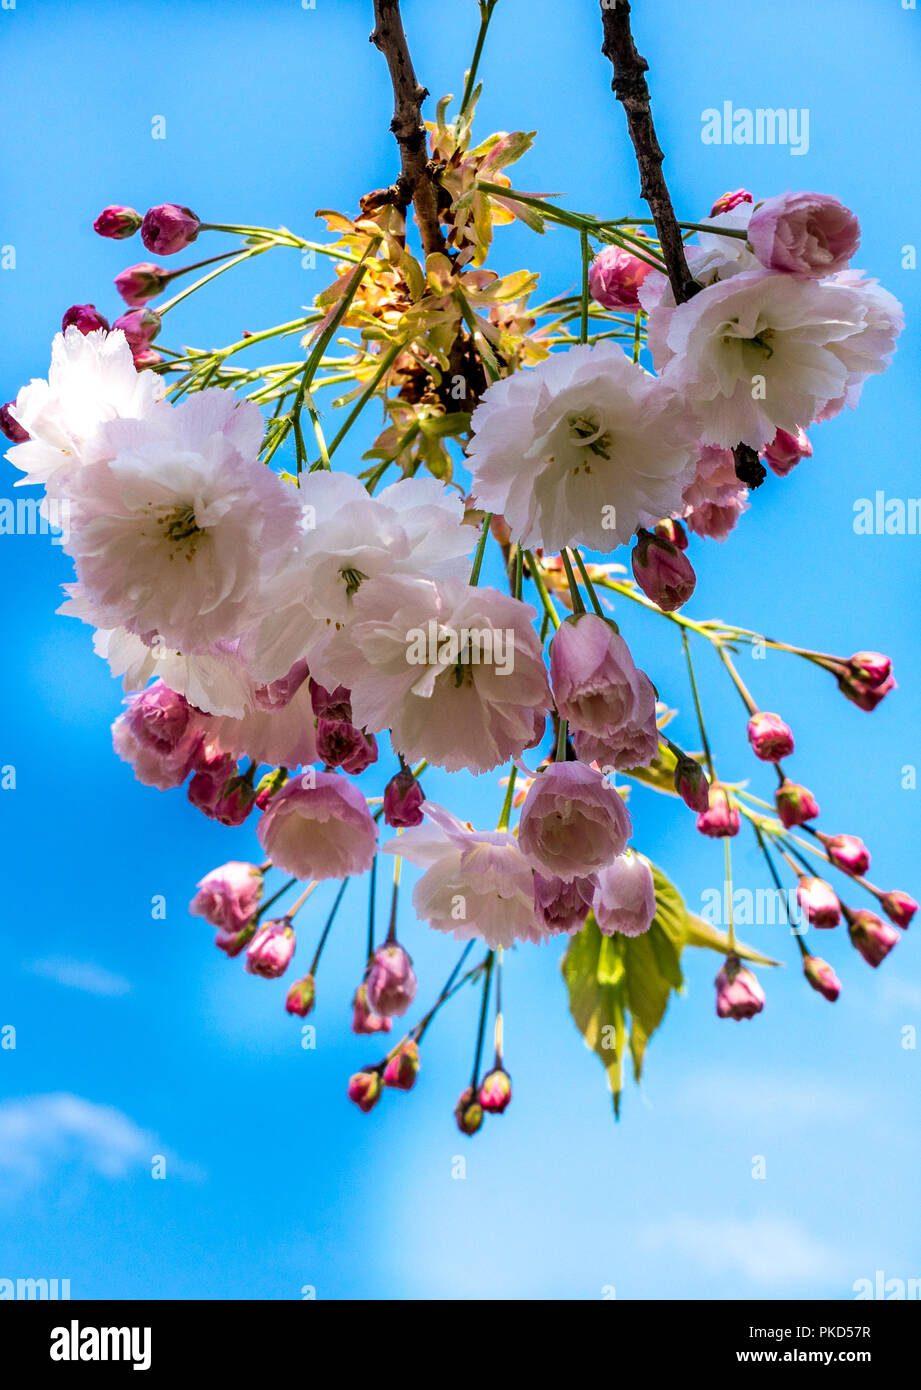 Netherlands,Lisse,Europe, a group of colorful flowers Stock Photo